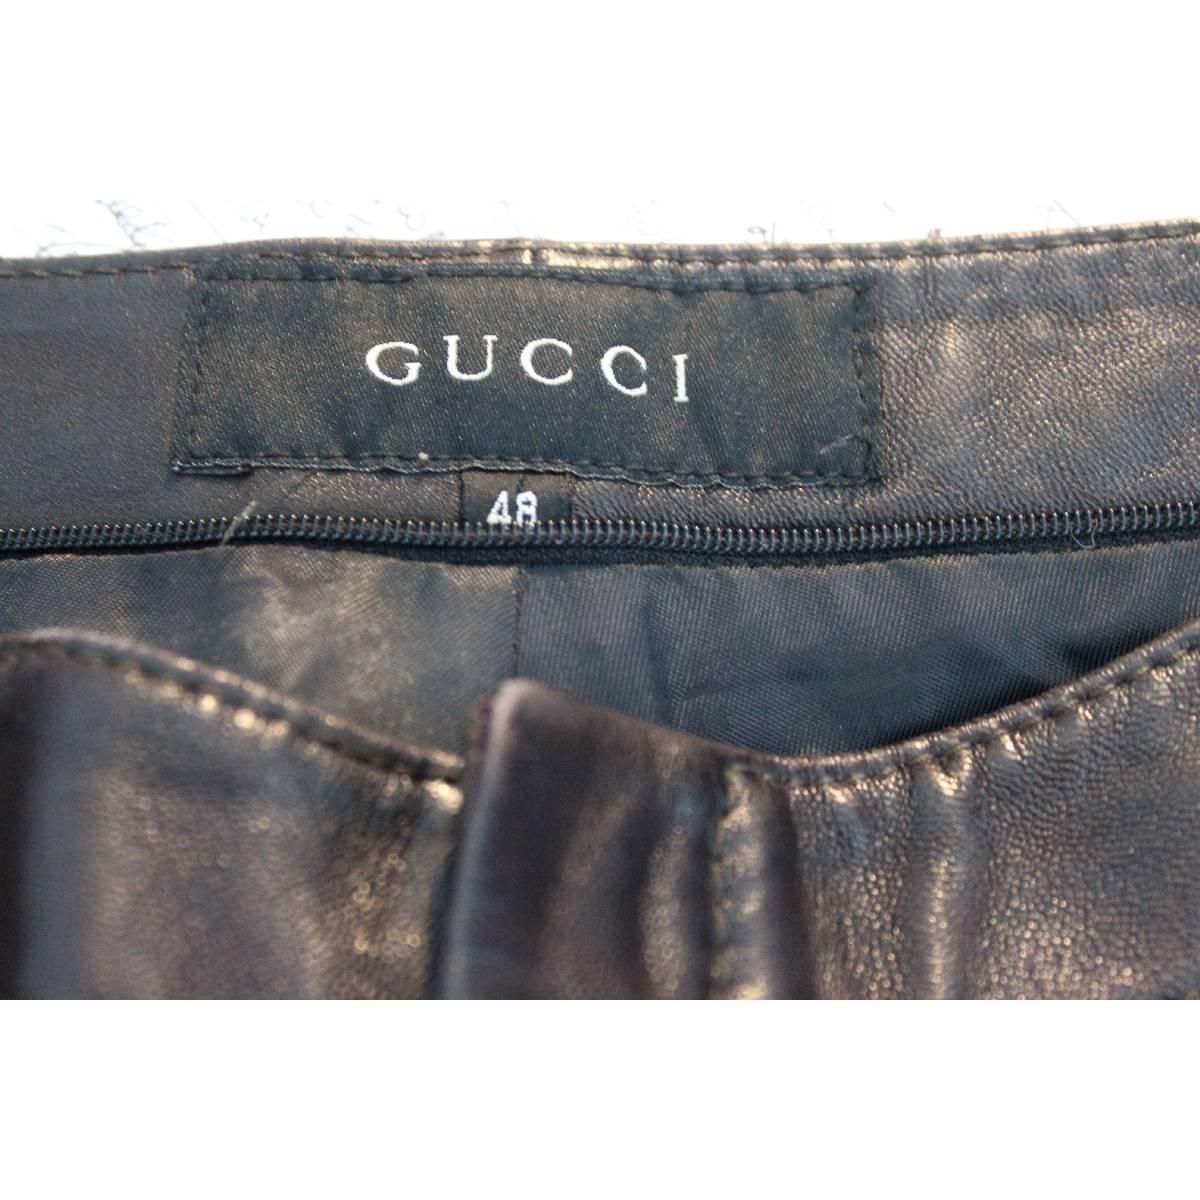 Men's Tom Ford For Gucci Biker Brown Leather Italian Trousers, 2000s